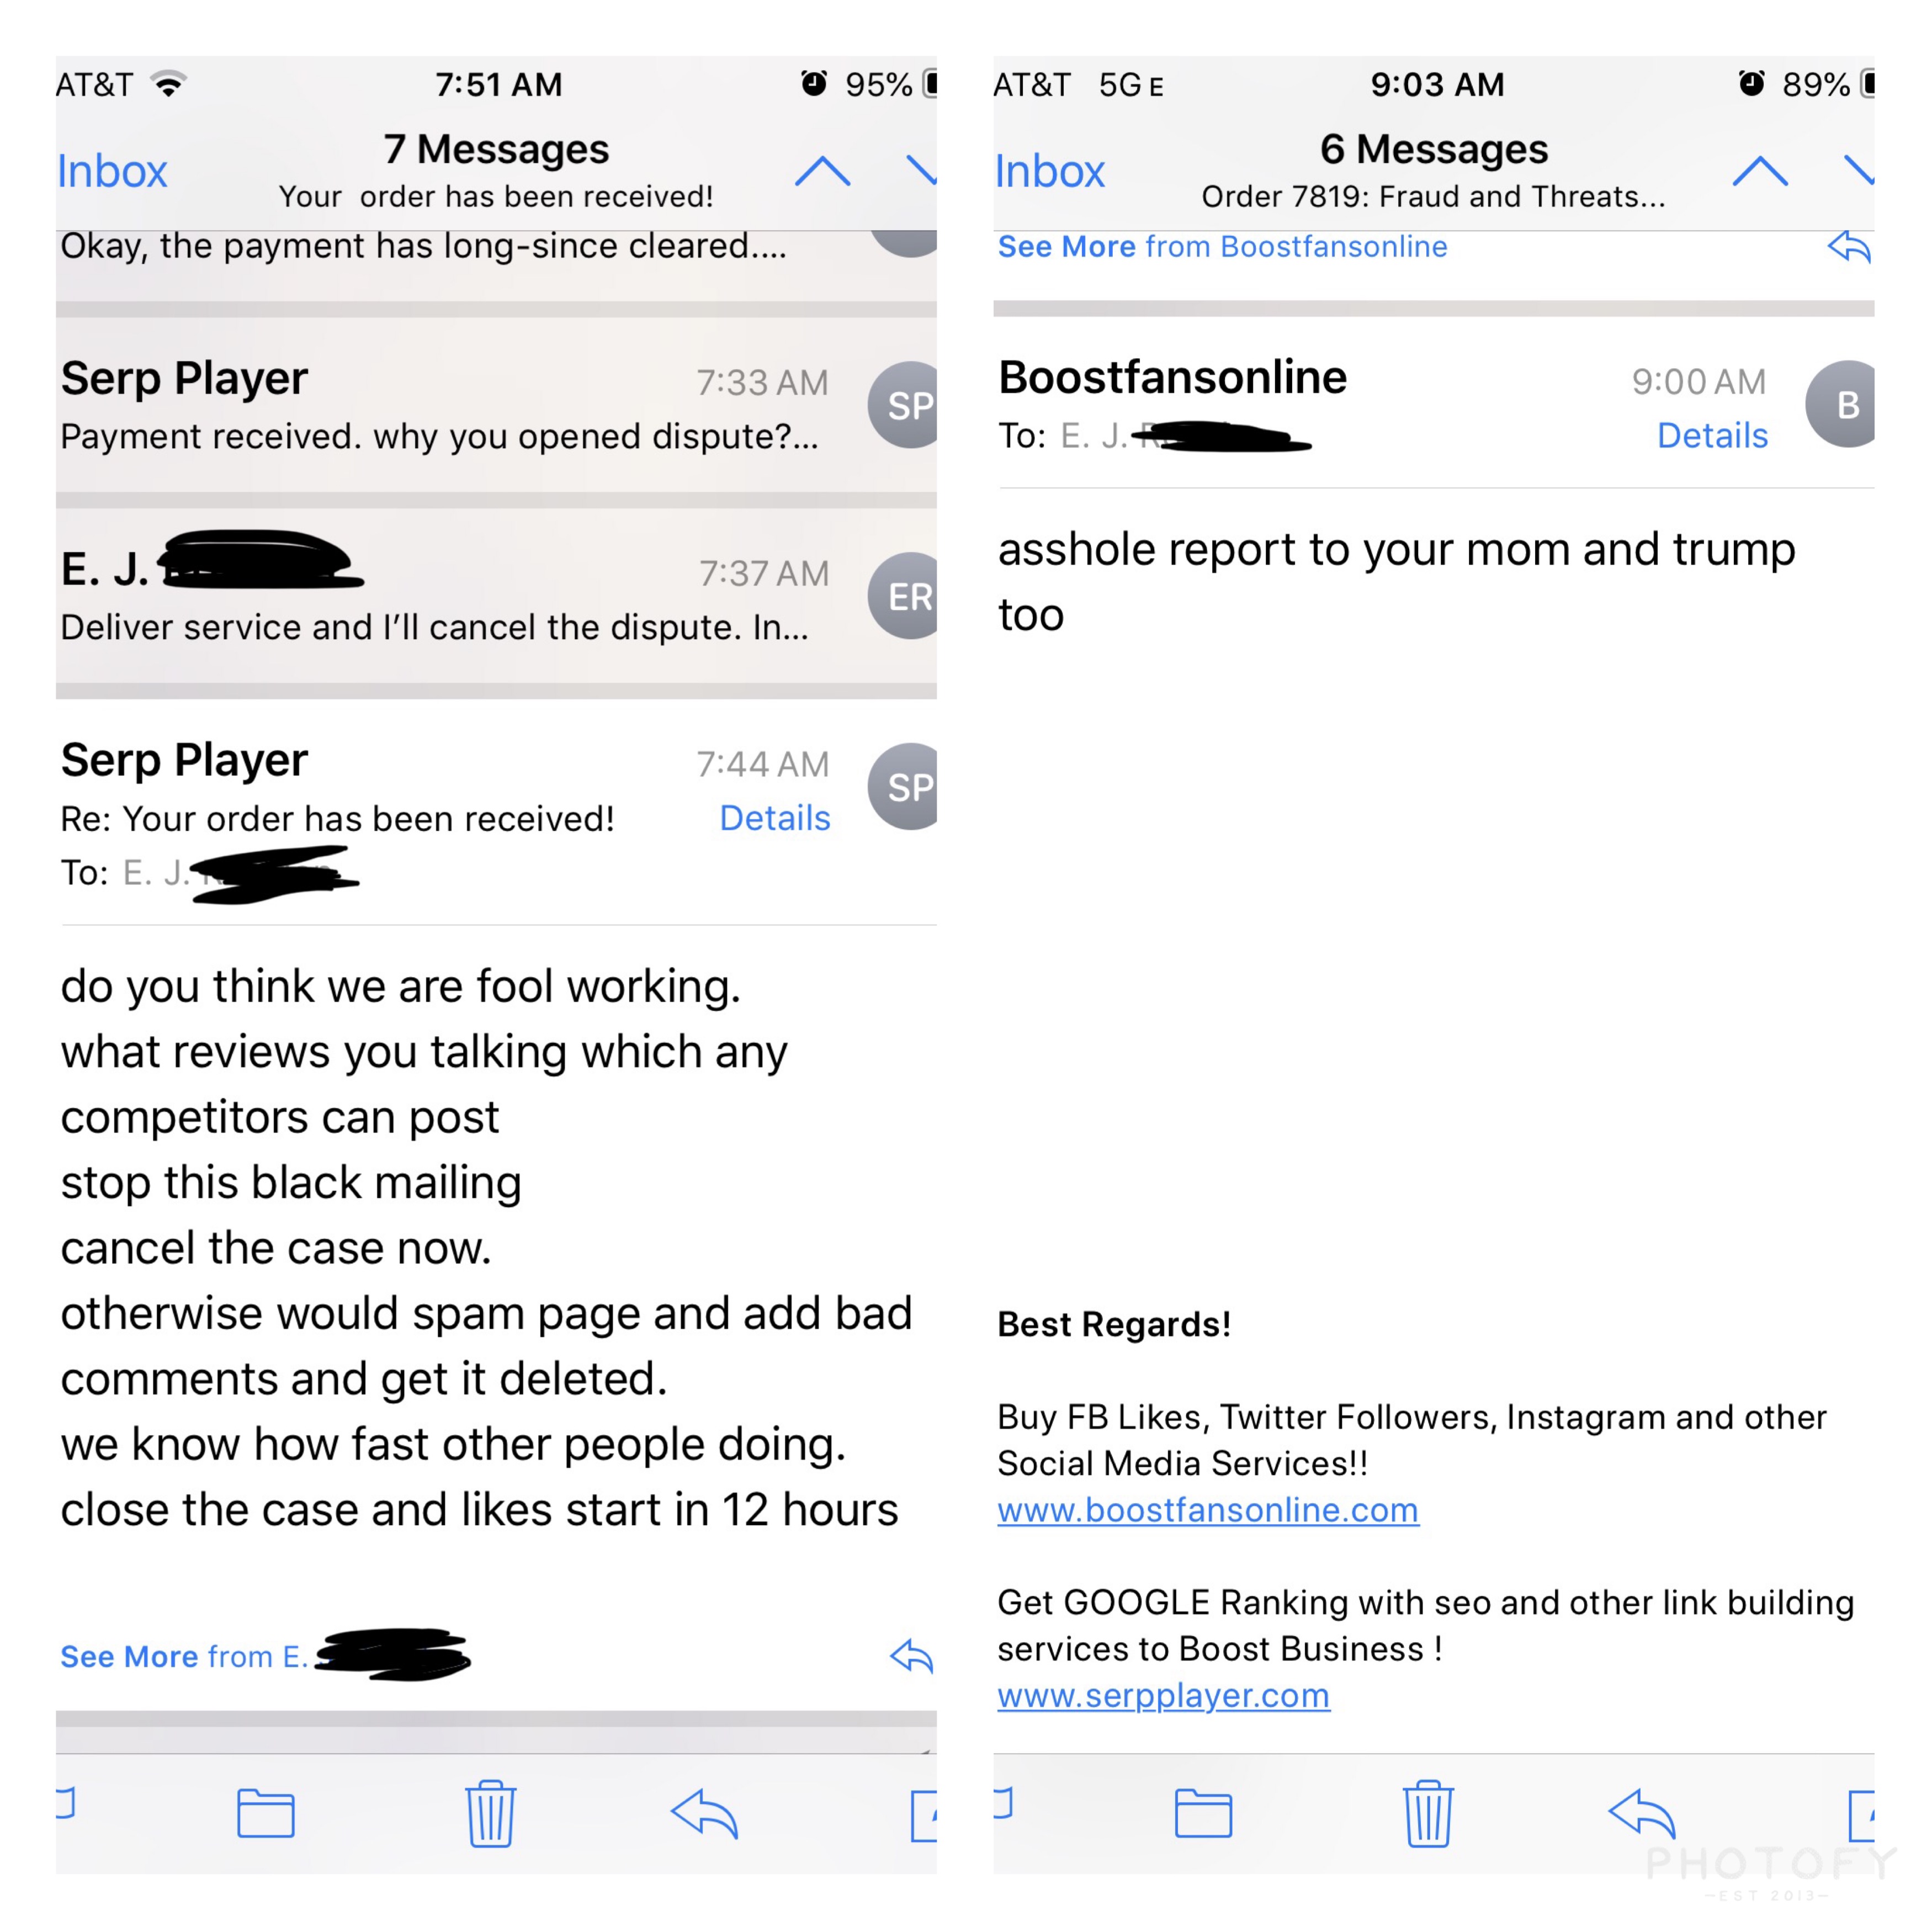 Emails from both the “rep” and their main email